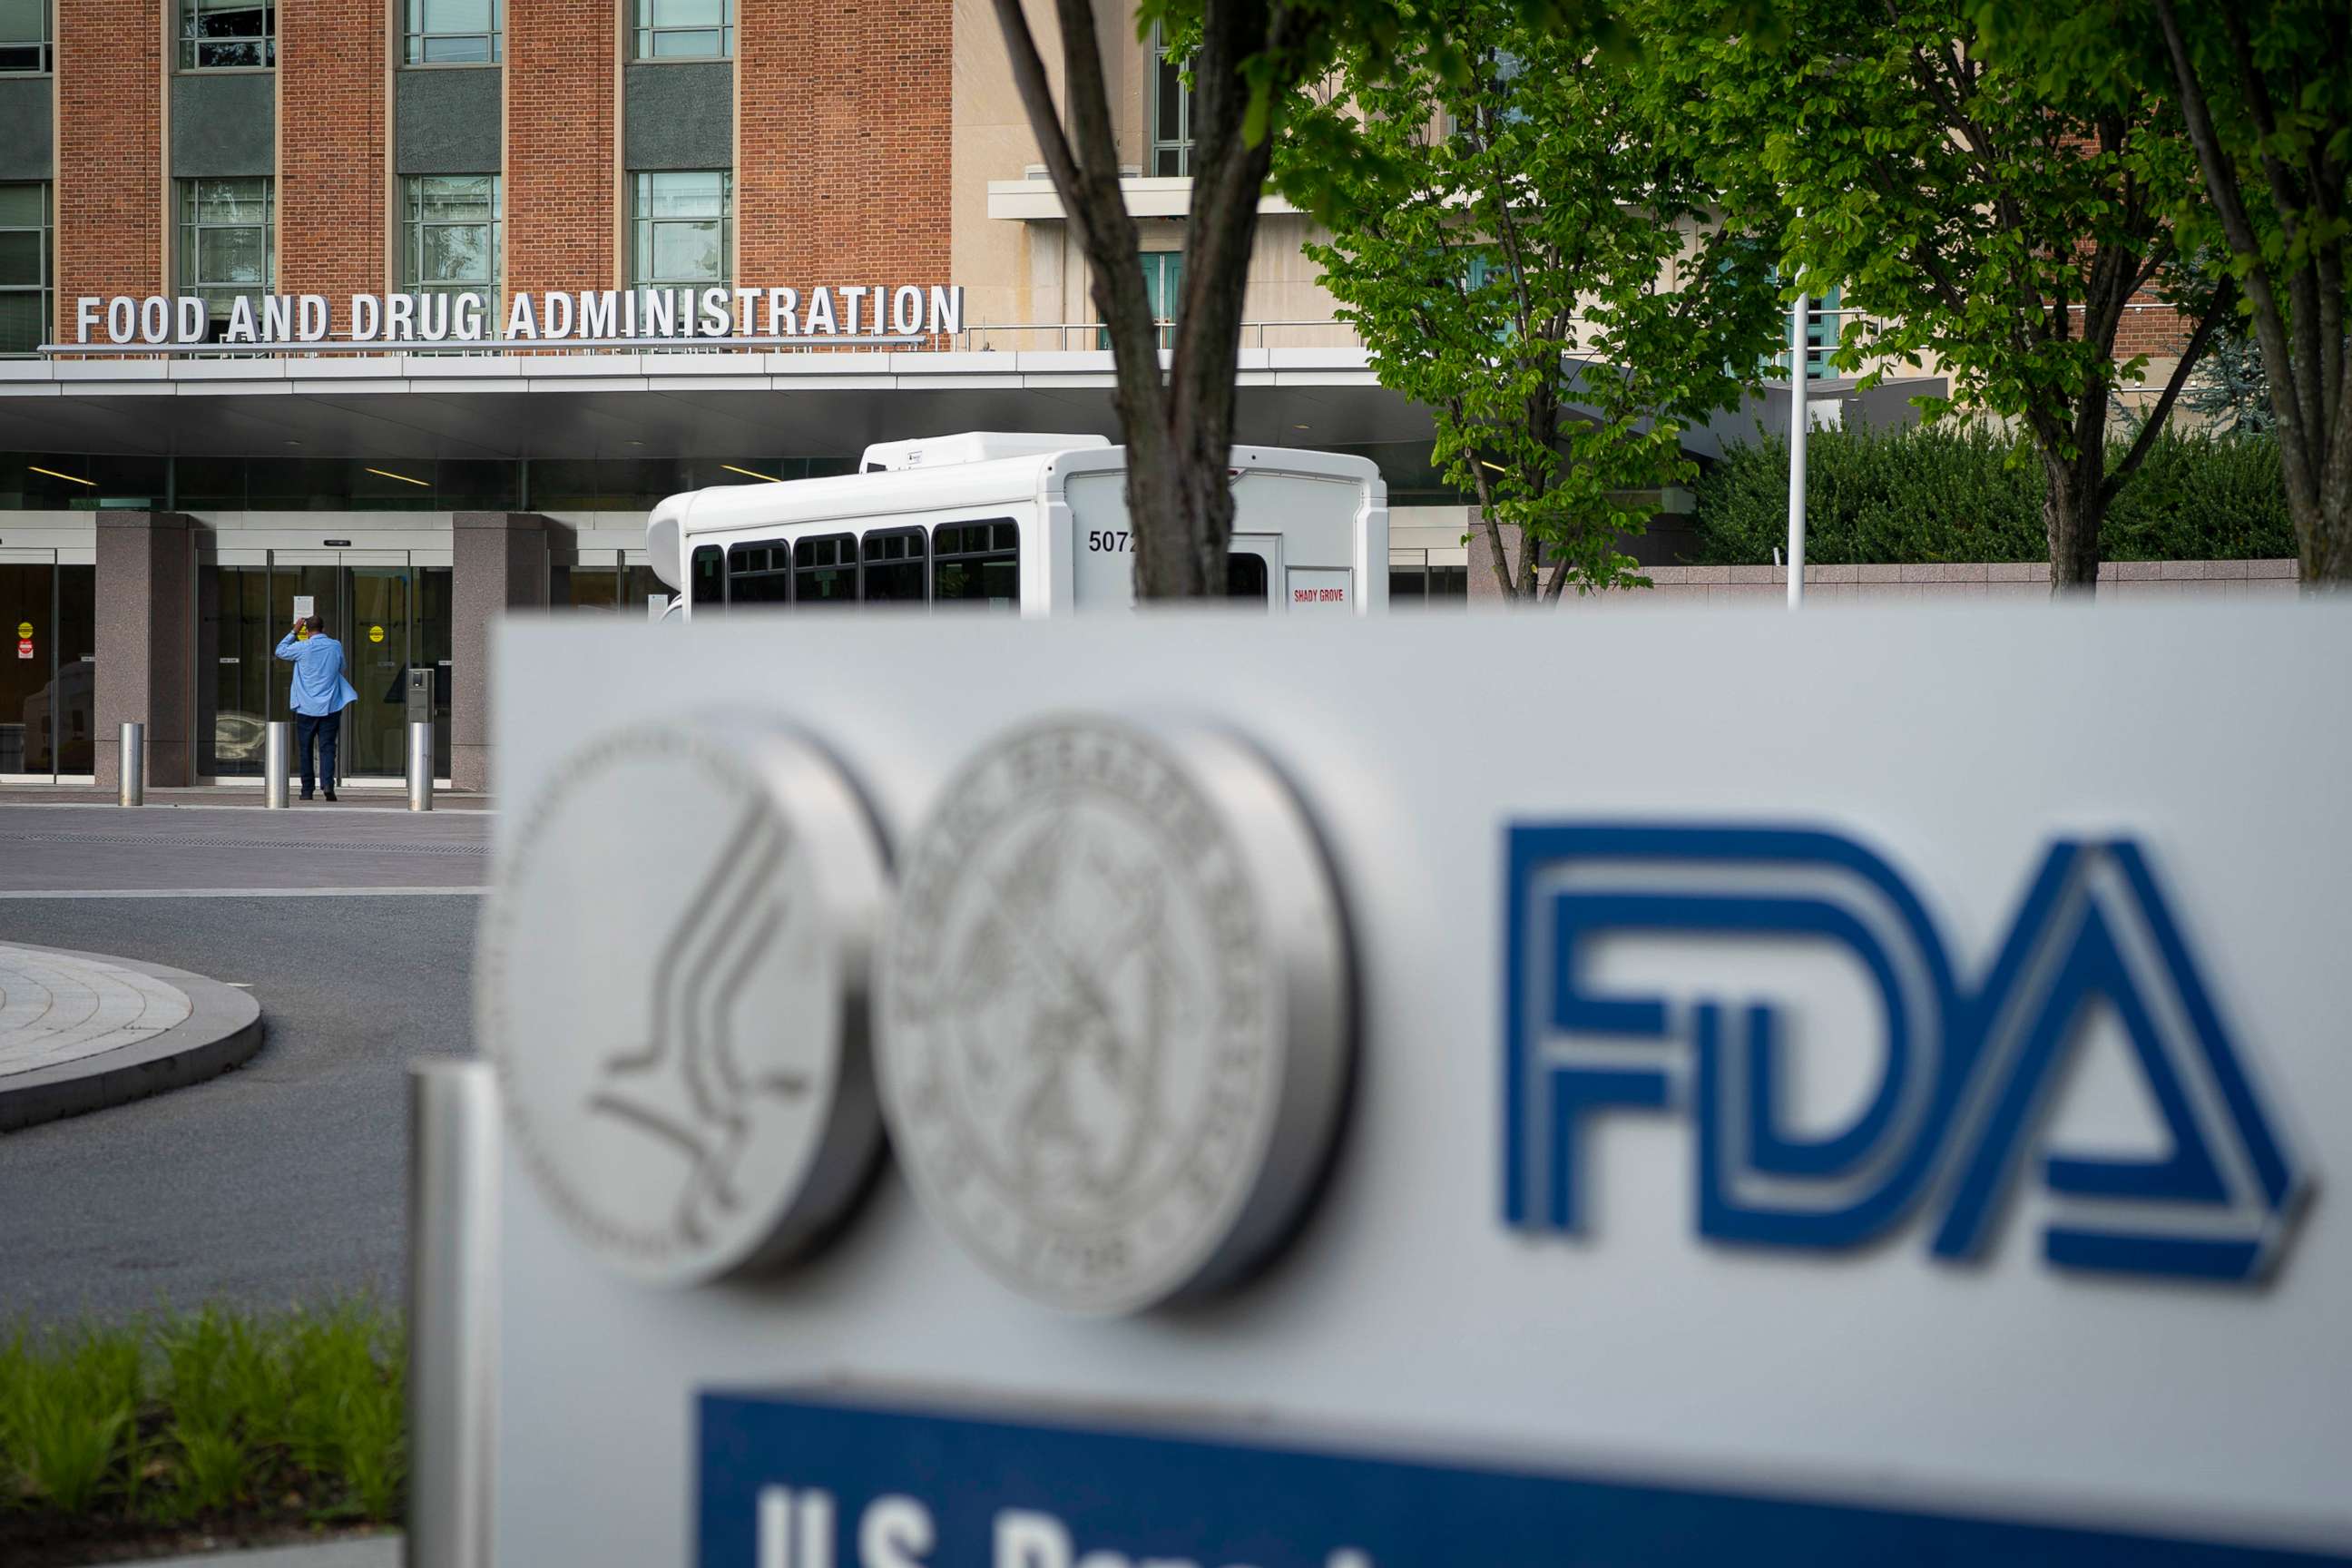 PHOTO: A sign for the Food And Drug Administration marks the entrance to the headquarters in White Oak, Md., July 20, 2020.